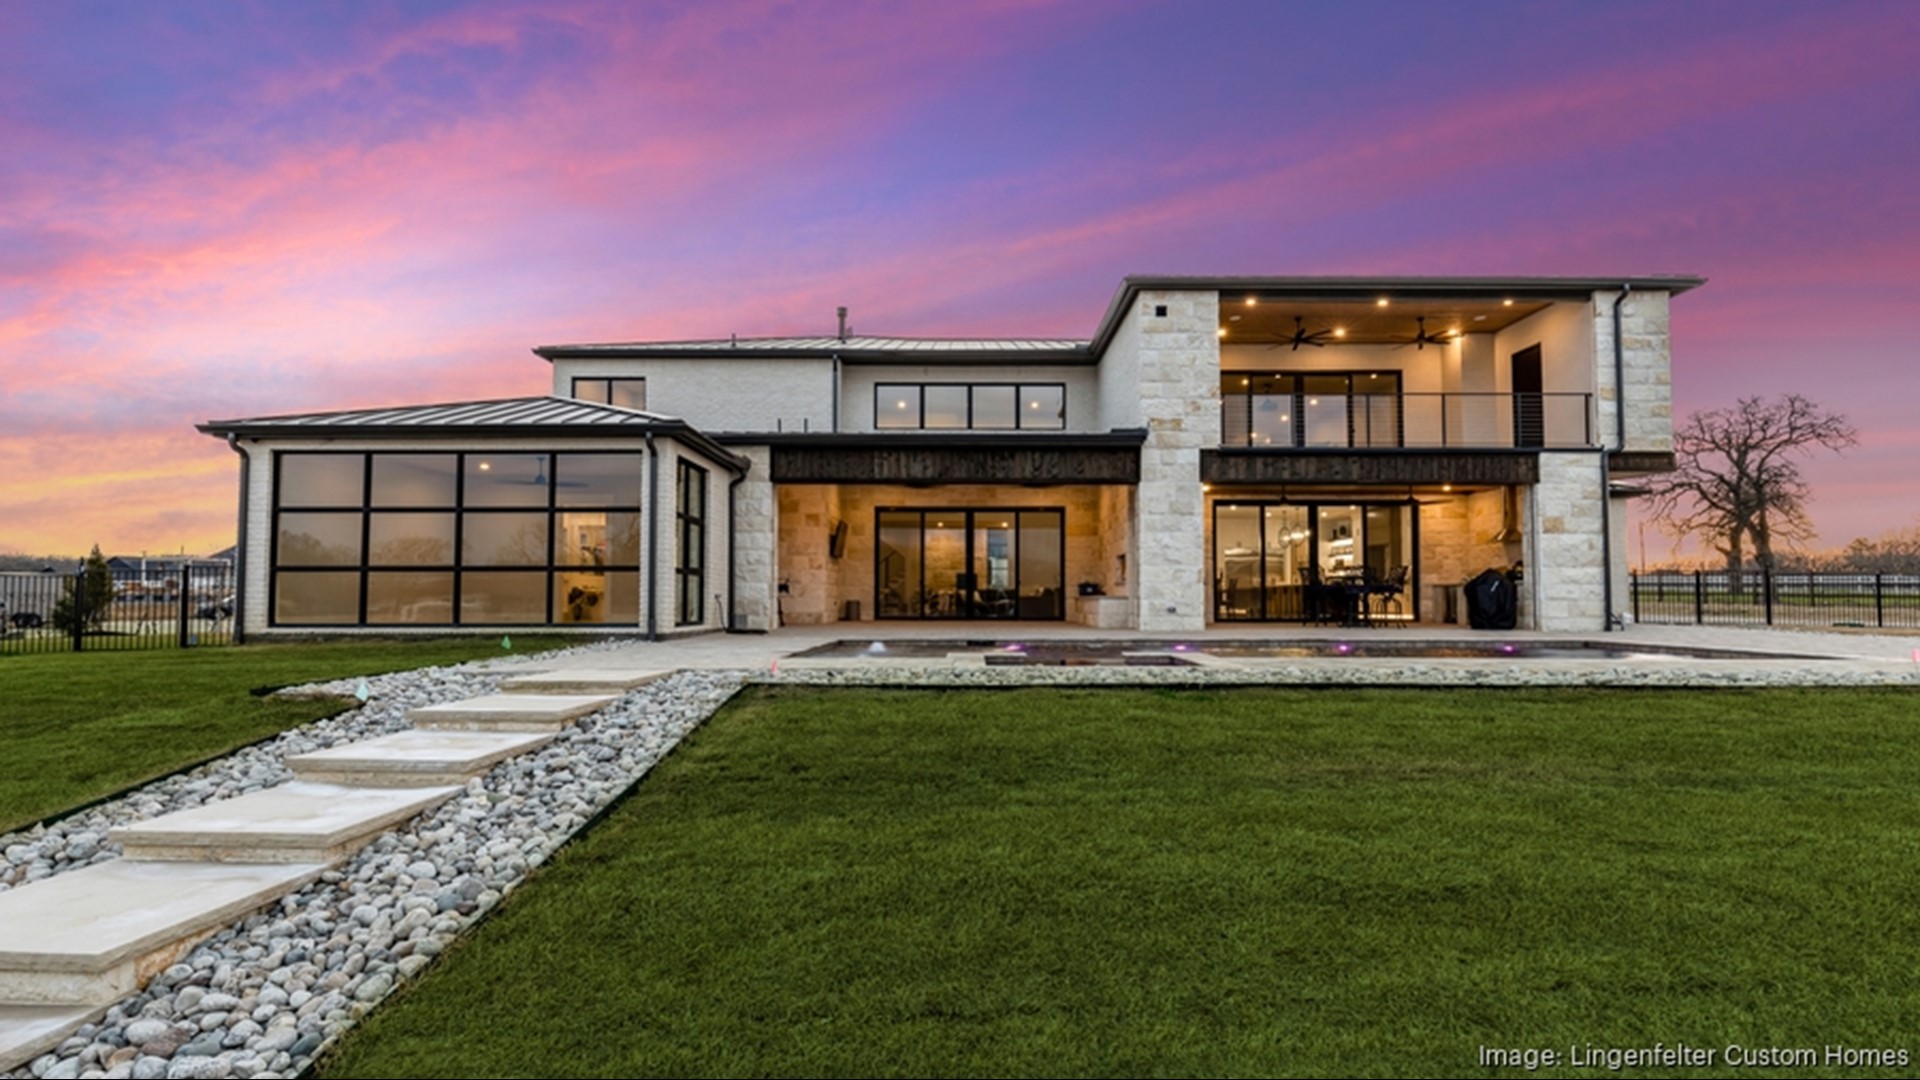 According to the Dallas Business Journal, luxury custom homes starting at about $3 million are heading to Bartonville, a small town near Argyle in Denton County.